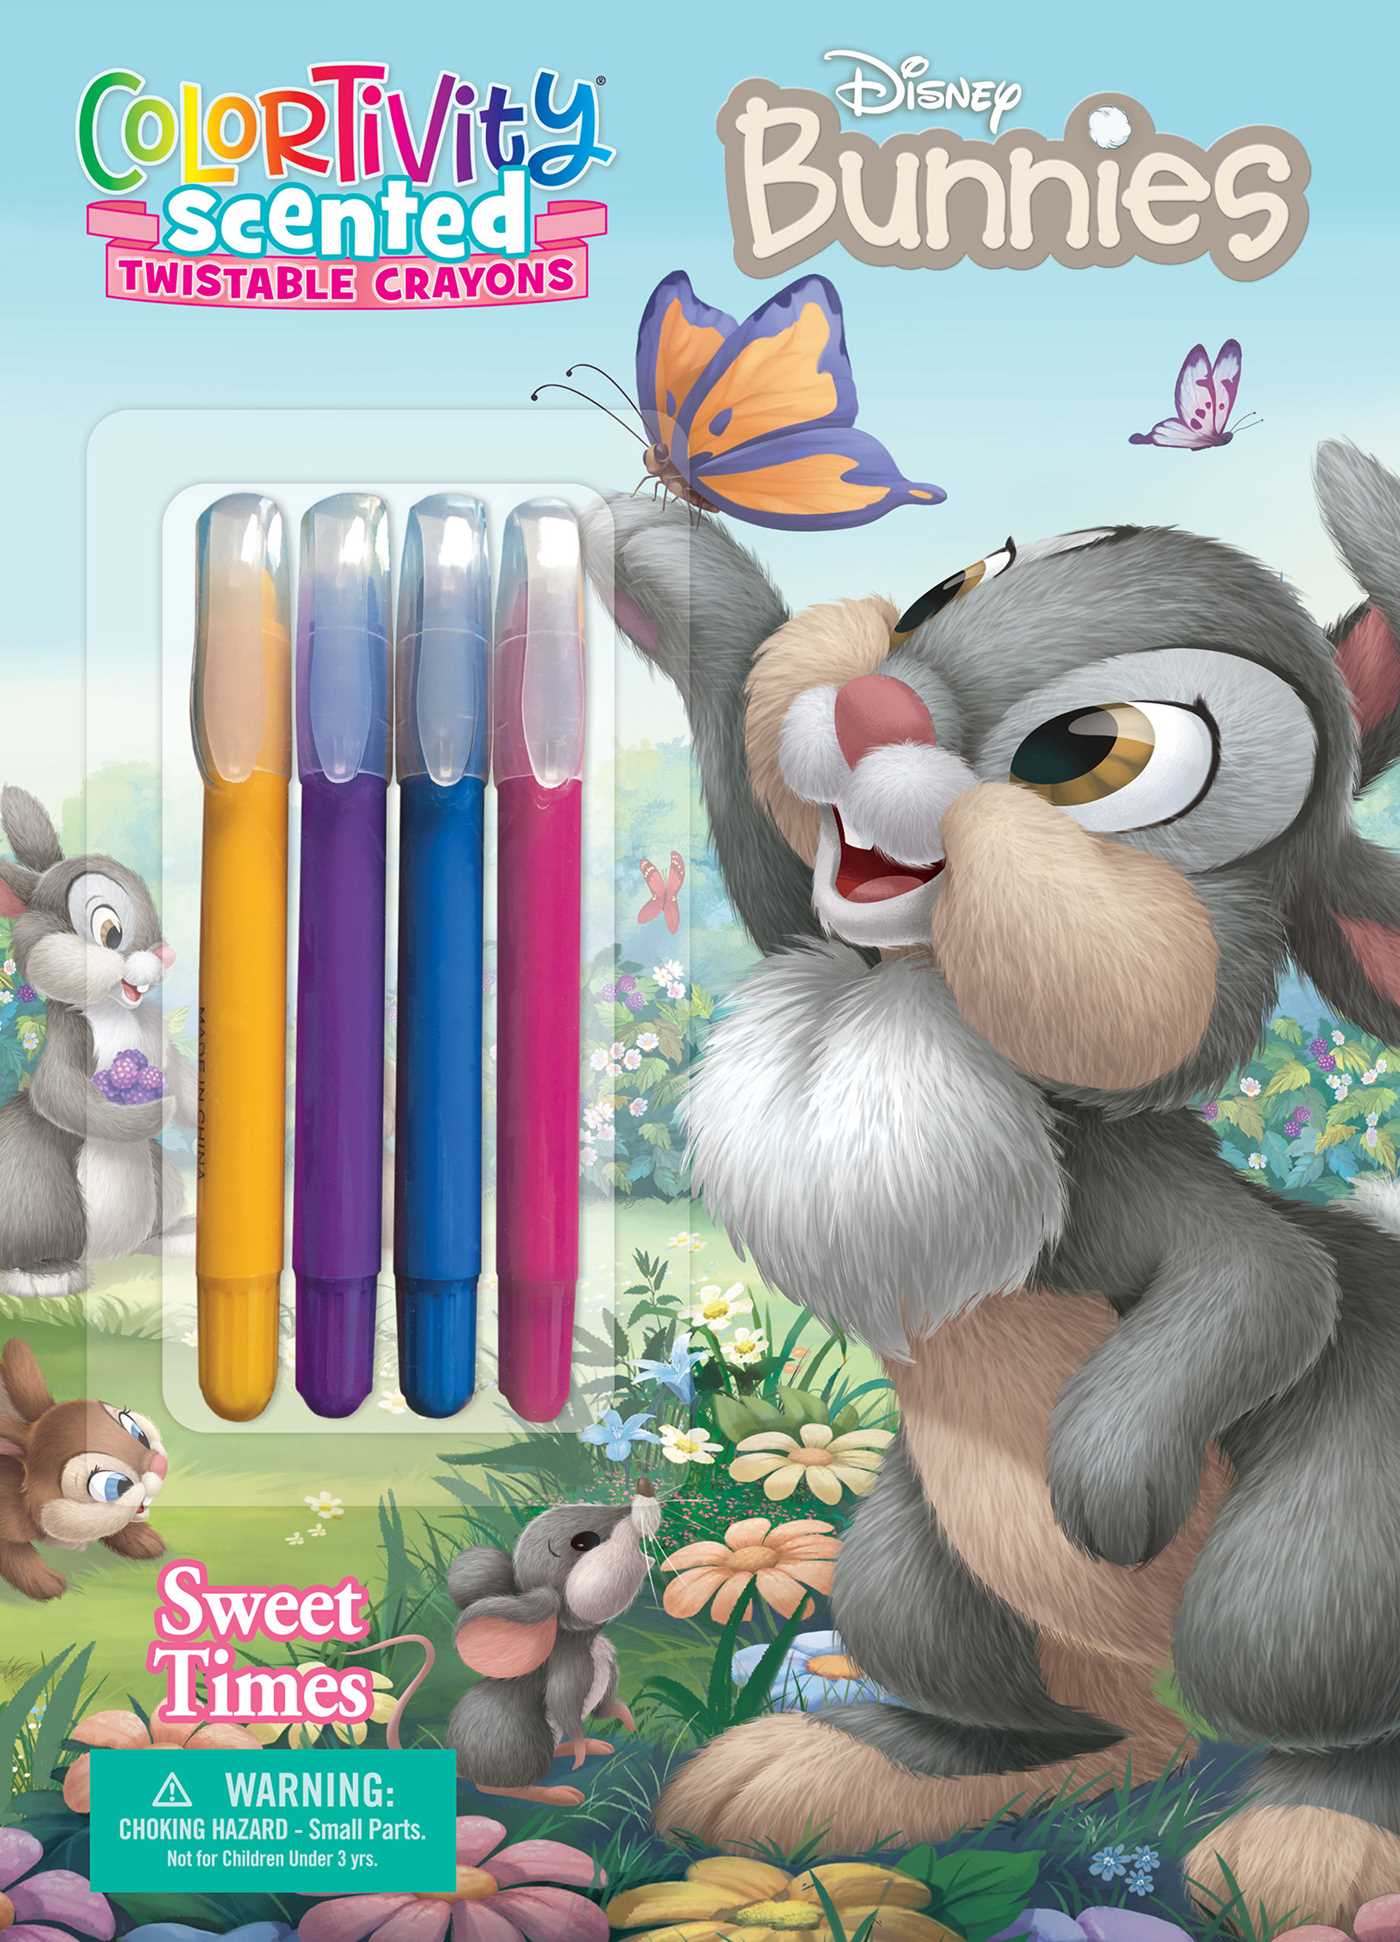 Disney Bunnies: Sweet Times : Colortivity with Scented Twistable Crayons | 